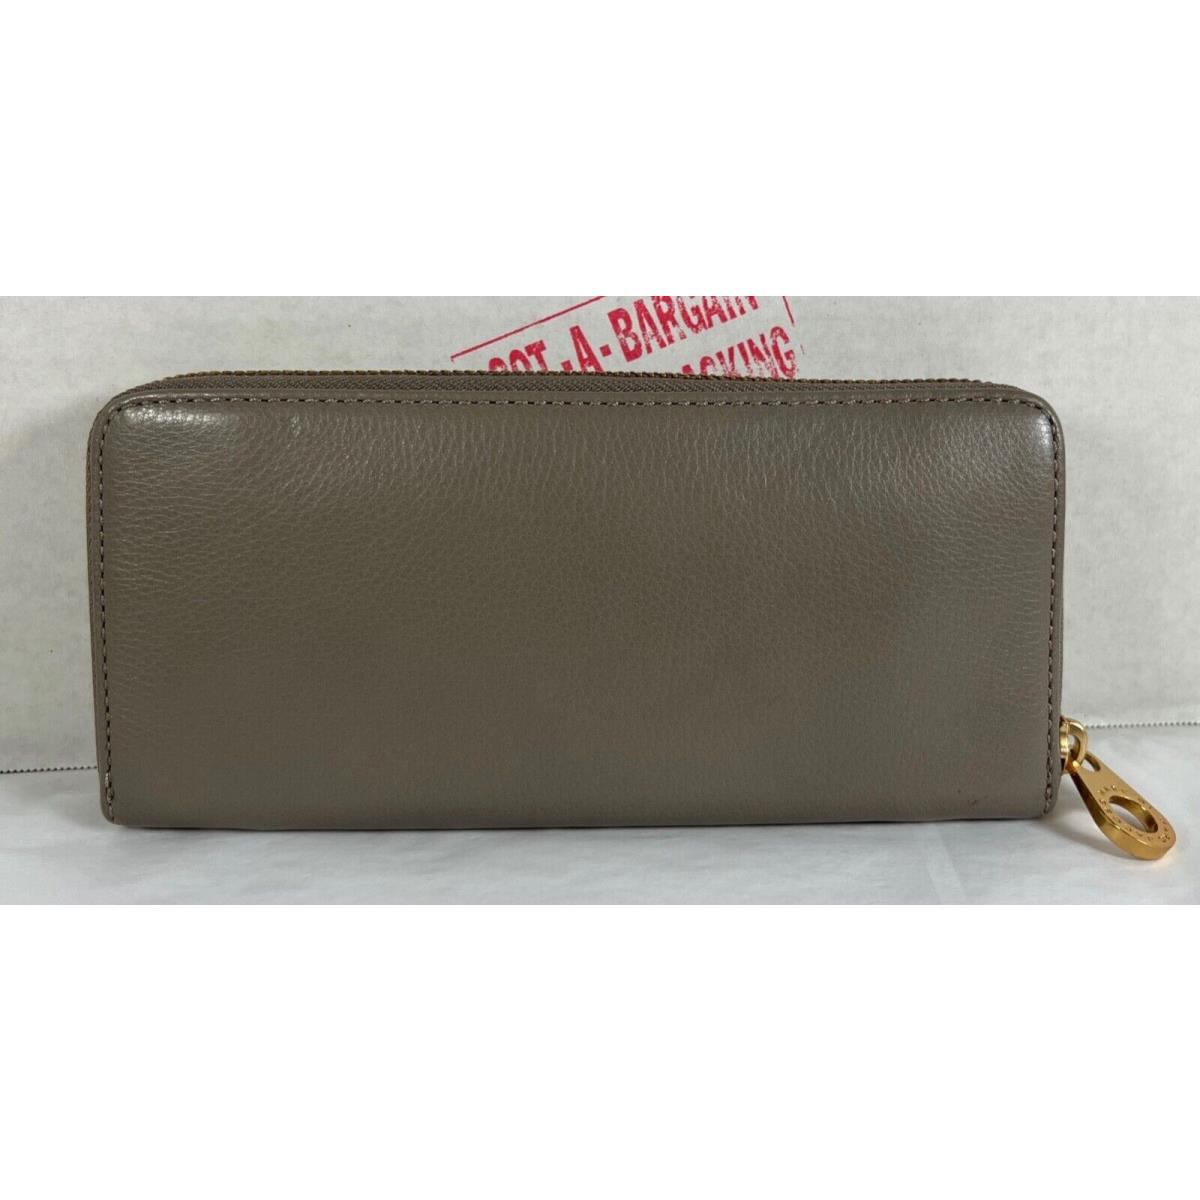 Marc Jacobs Warm Zinc Pebbled Leather Zip Around Long Wallet Coin Purse